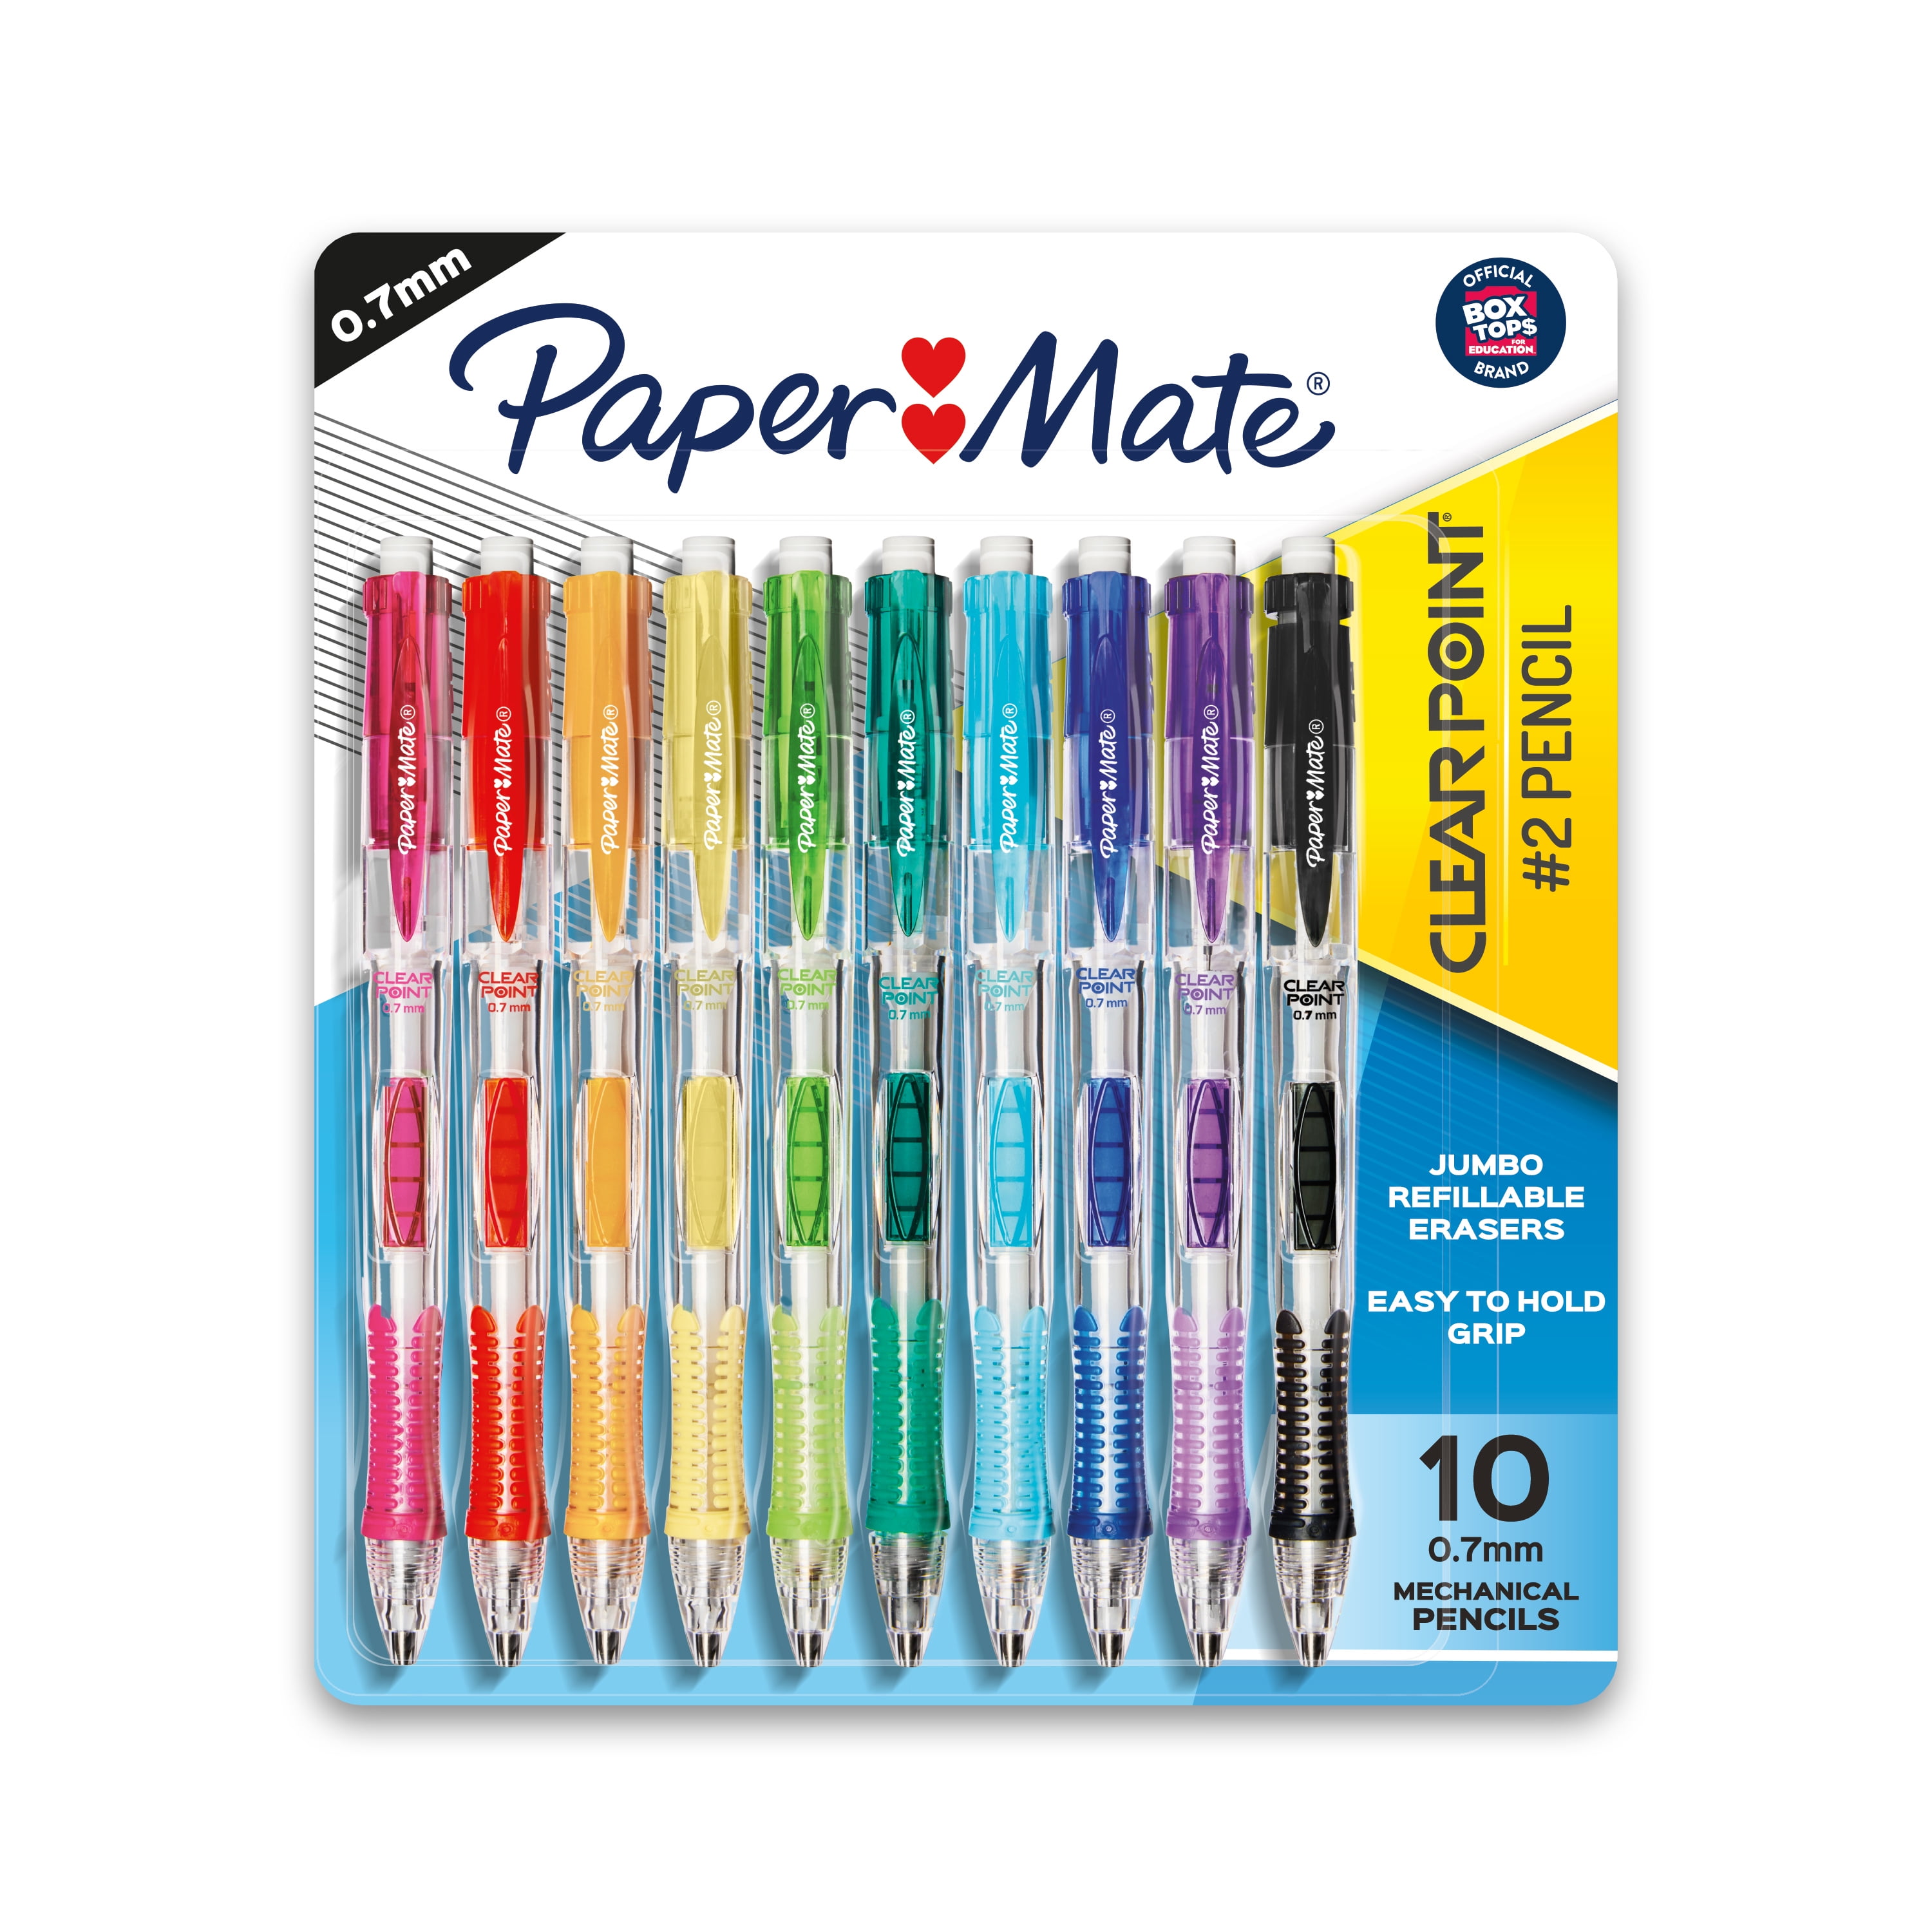 Paper Mate Clear Point Mechanical Pencil, 0.7 mm, HB (#2), Black Lead, Assorted Barrel Colors, 10/Pack